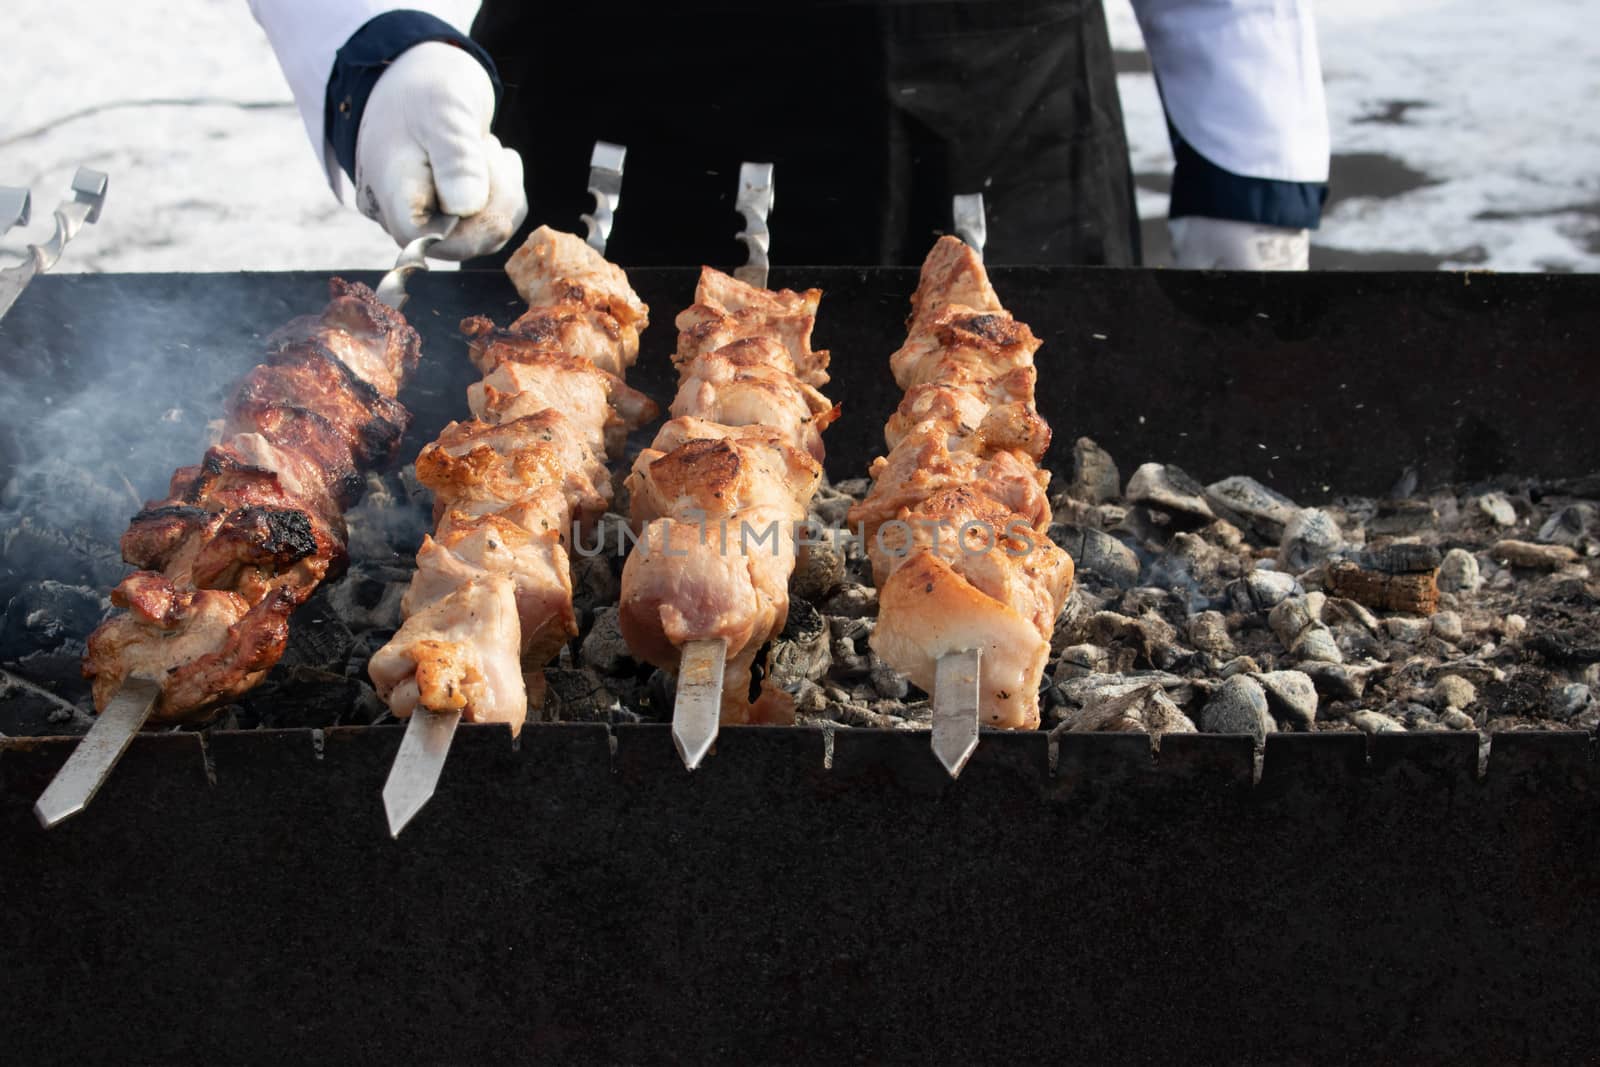 Traditional Russian shashlik on a barbecue skewer, cooking outdoor activities meat on skewers